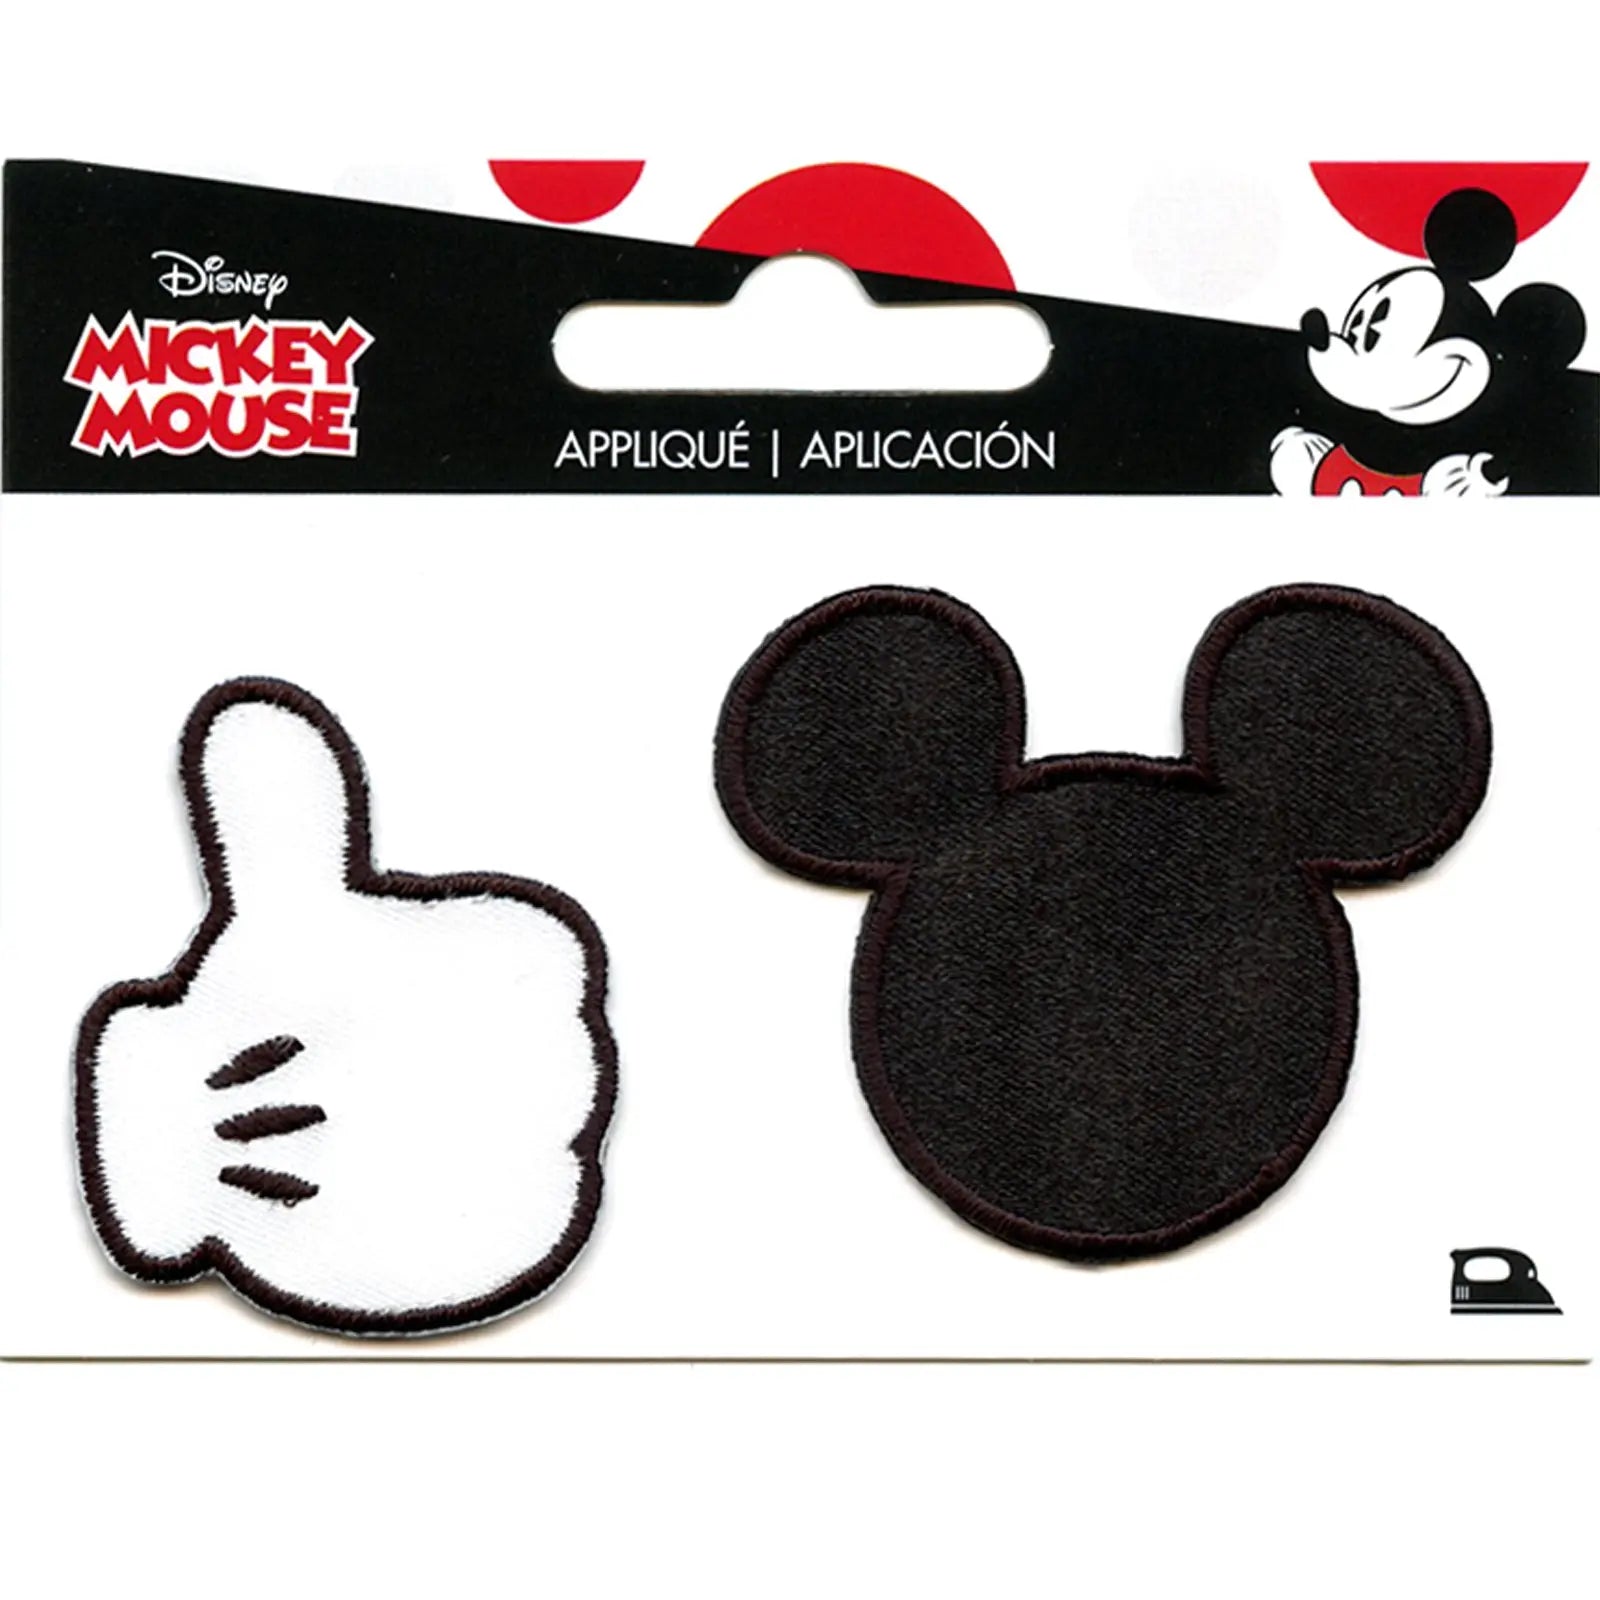  Simplicity 193 1143 Wrights Disney Mickey Mouse Iron-On  Applique : Arts, Crafts & Sewing